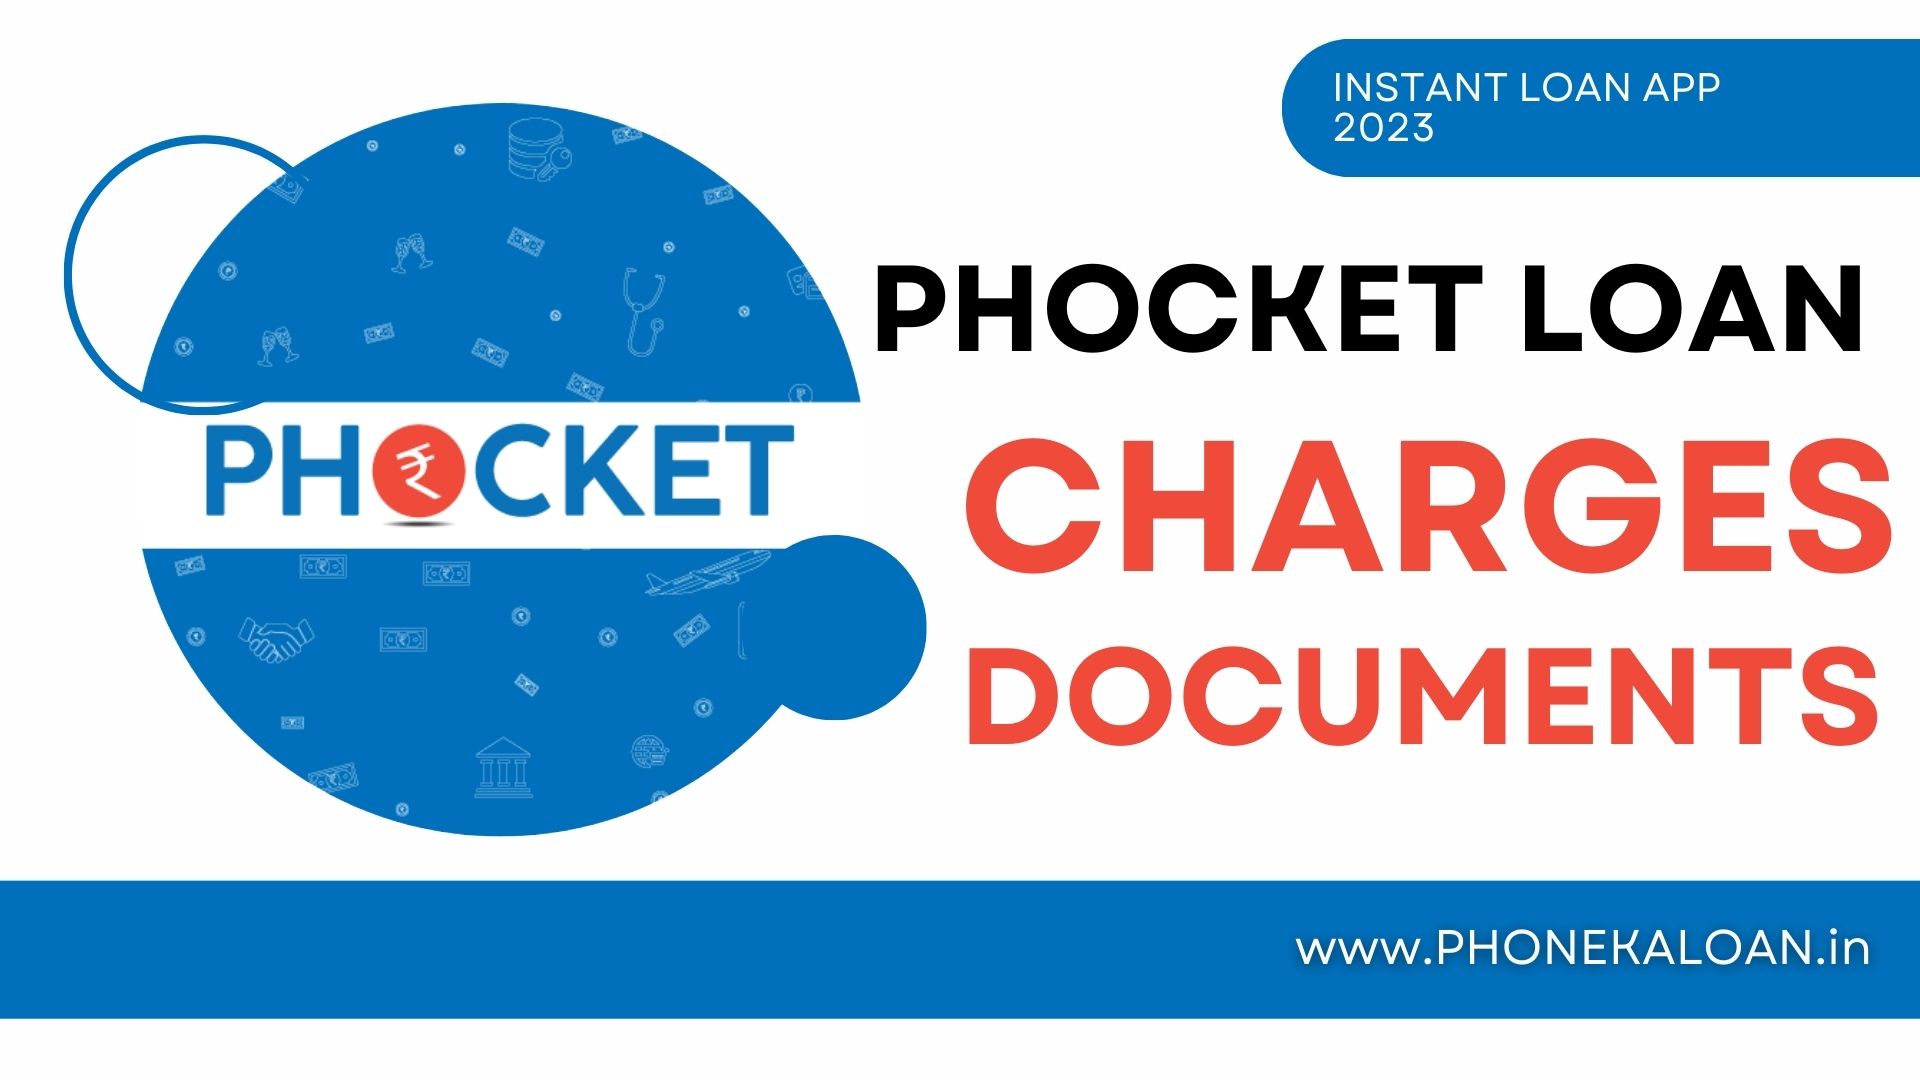 Phocket Loan App Charges